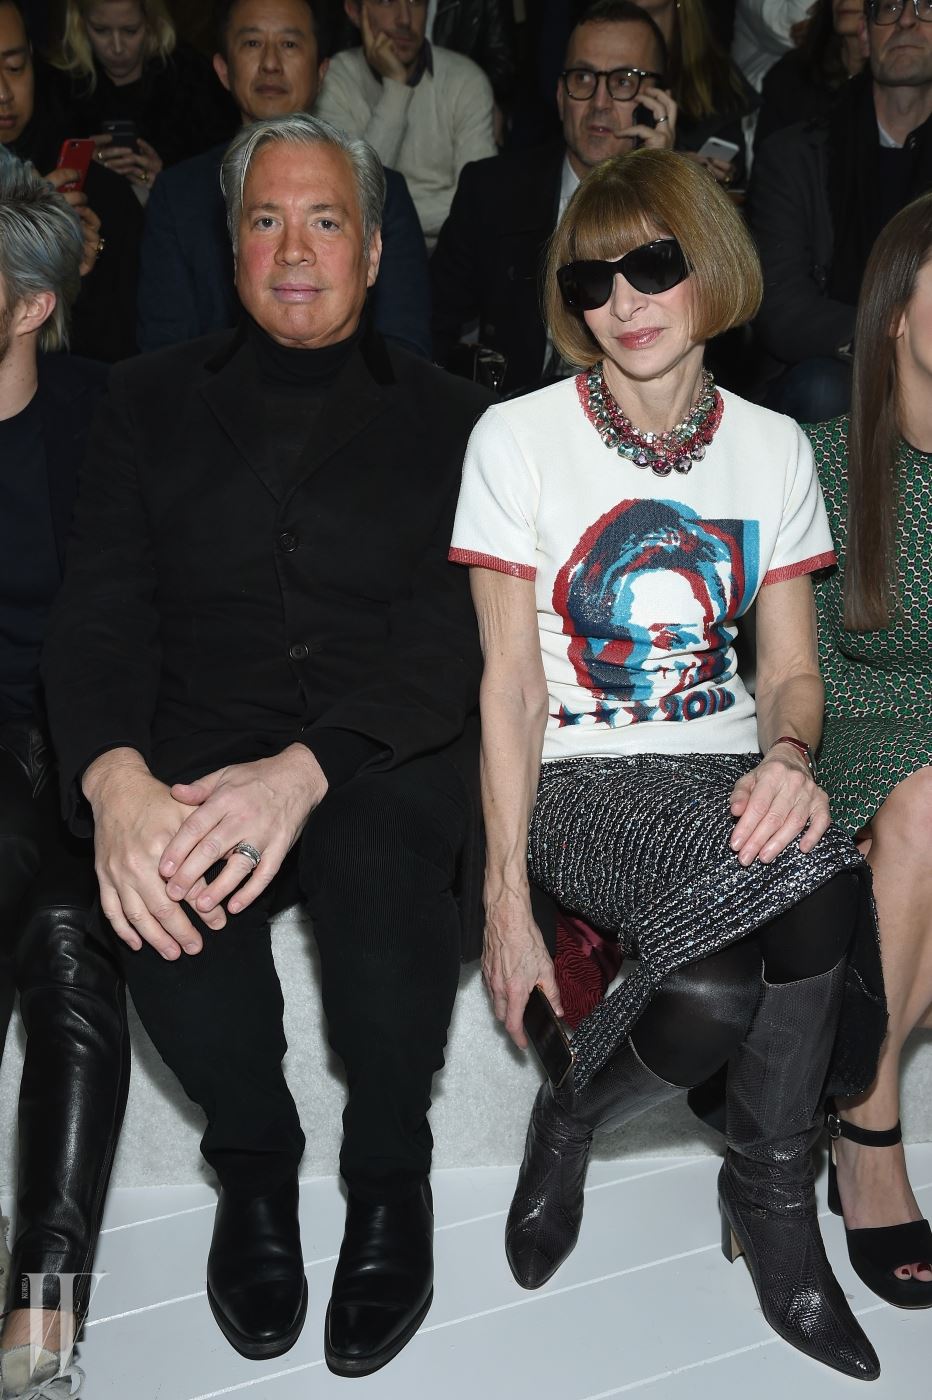 NEW YORK, NY - FEBRUARY 18:  Robert Duffy and Anna Wintour attend the Marc Jacobs Fall 2016 fashion show during New York Fashion Week at Park Avenue Armory on February 18, 2016 in New York City.  (Photo by Dimitrios Kambouris/Getty Images for Marc Jacobs)